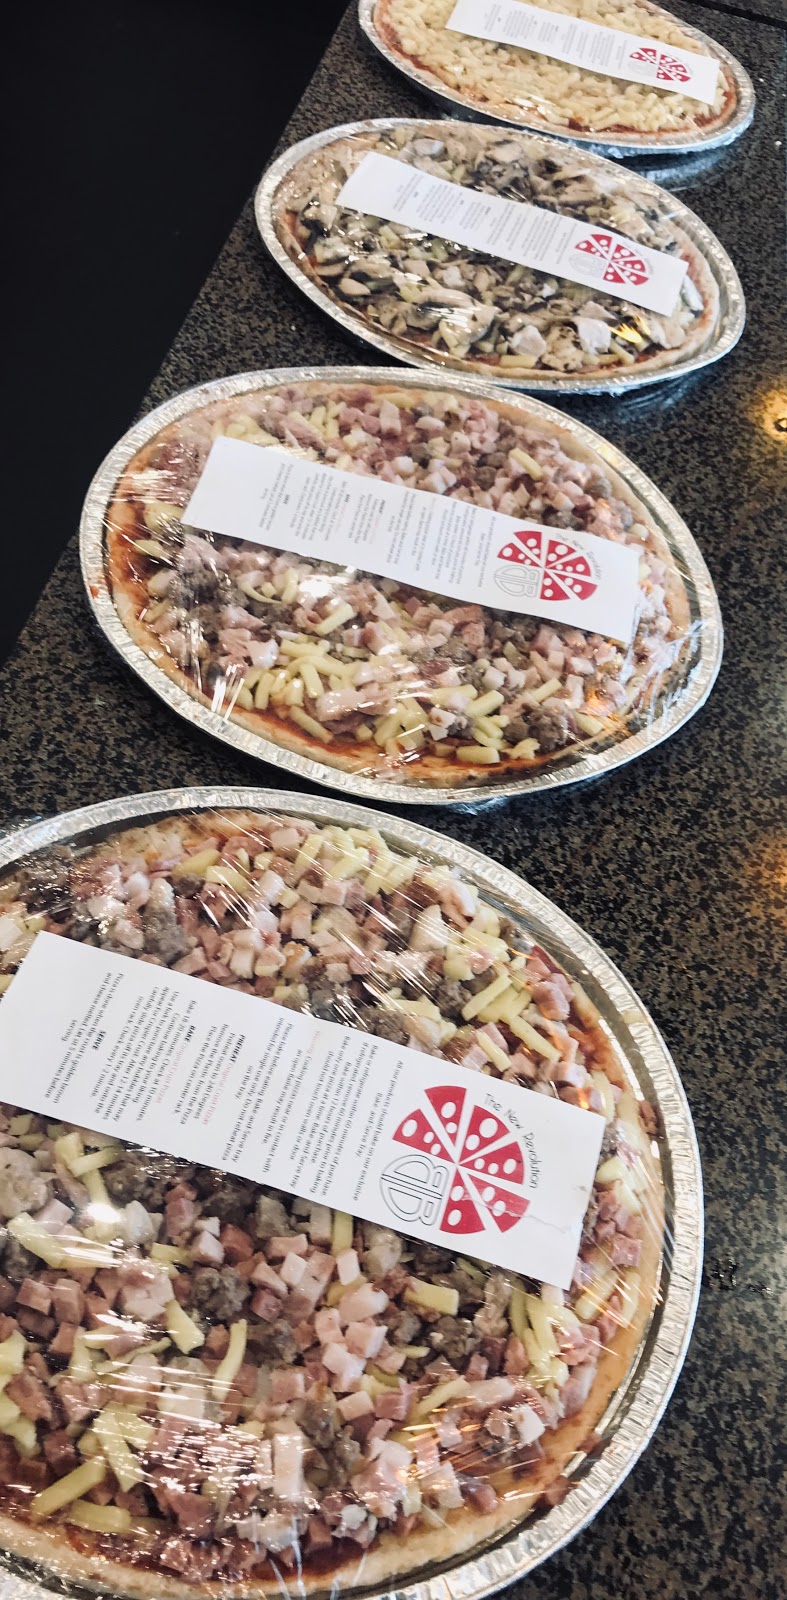 Best Bite Pizza | meal delivery | Shop 1/28 Coomera Grand Dr, Upper Coomera QLD 4209, Australia | 1800227499 OR +61 1800 227 499